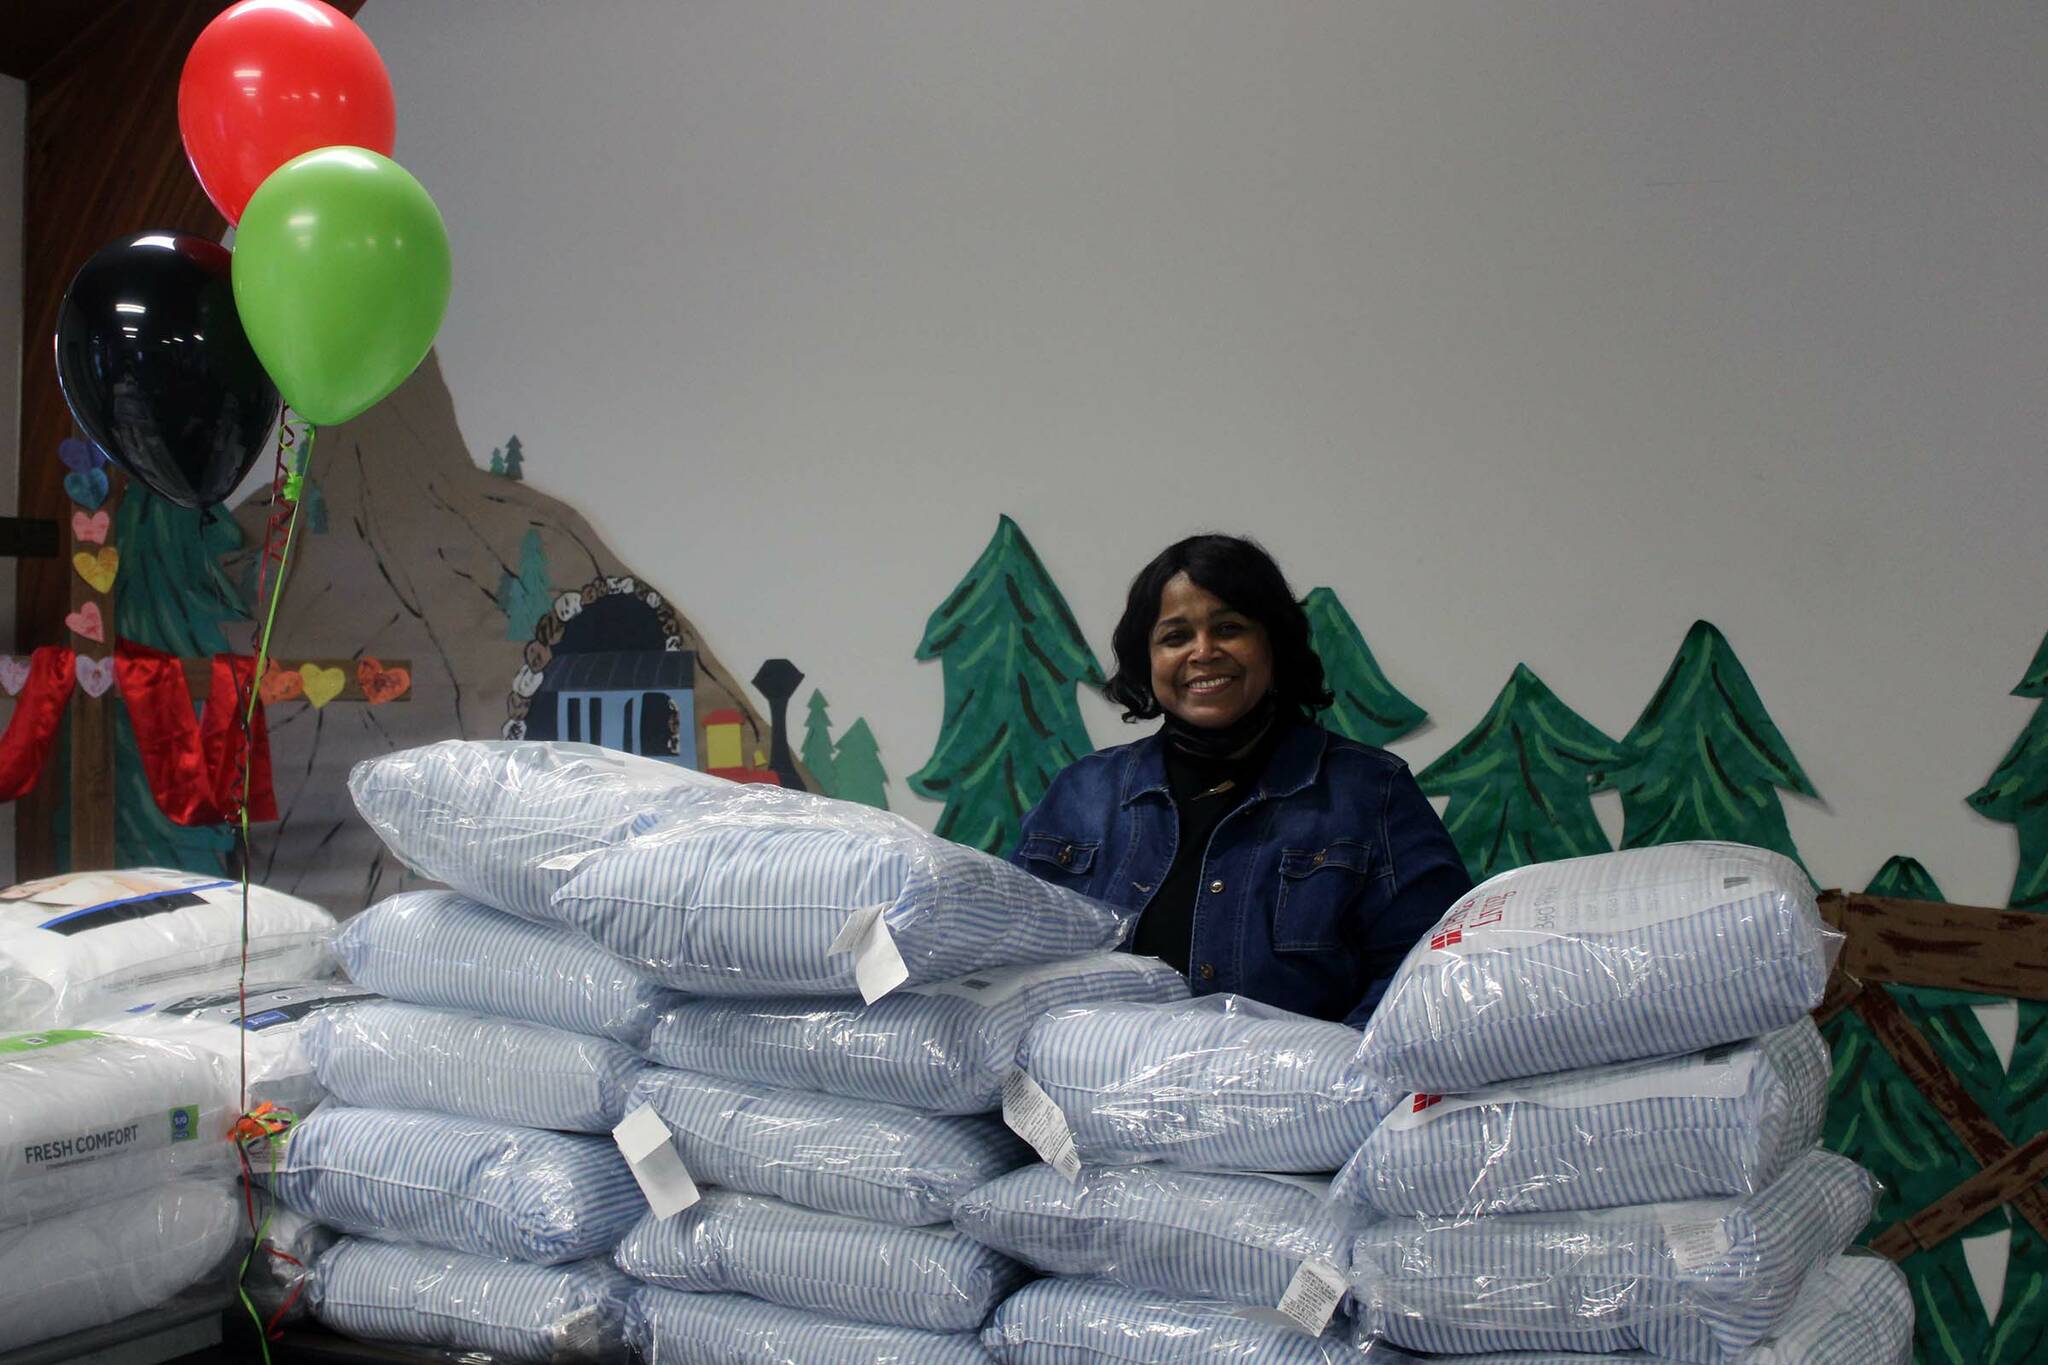 Sherry Patterson, president of the Black Awareness Association of Juneau, stands amid a mountain of donated pillows on Jan. 17. Patterson was part of a drive to collect food and household goods in honor of Martin Luther King Jr. Day. (Dana Zigmund/Juneau Empire)